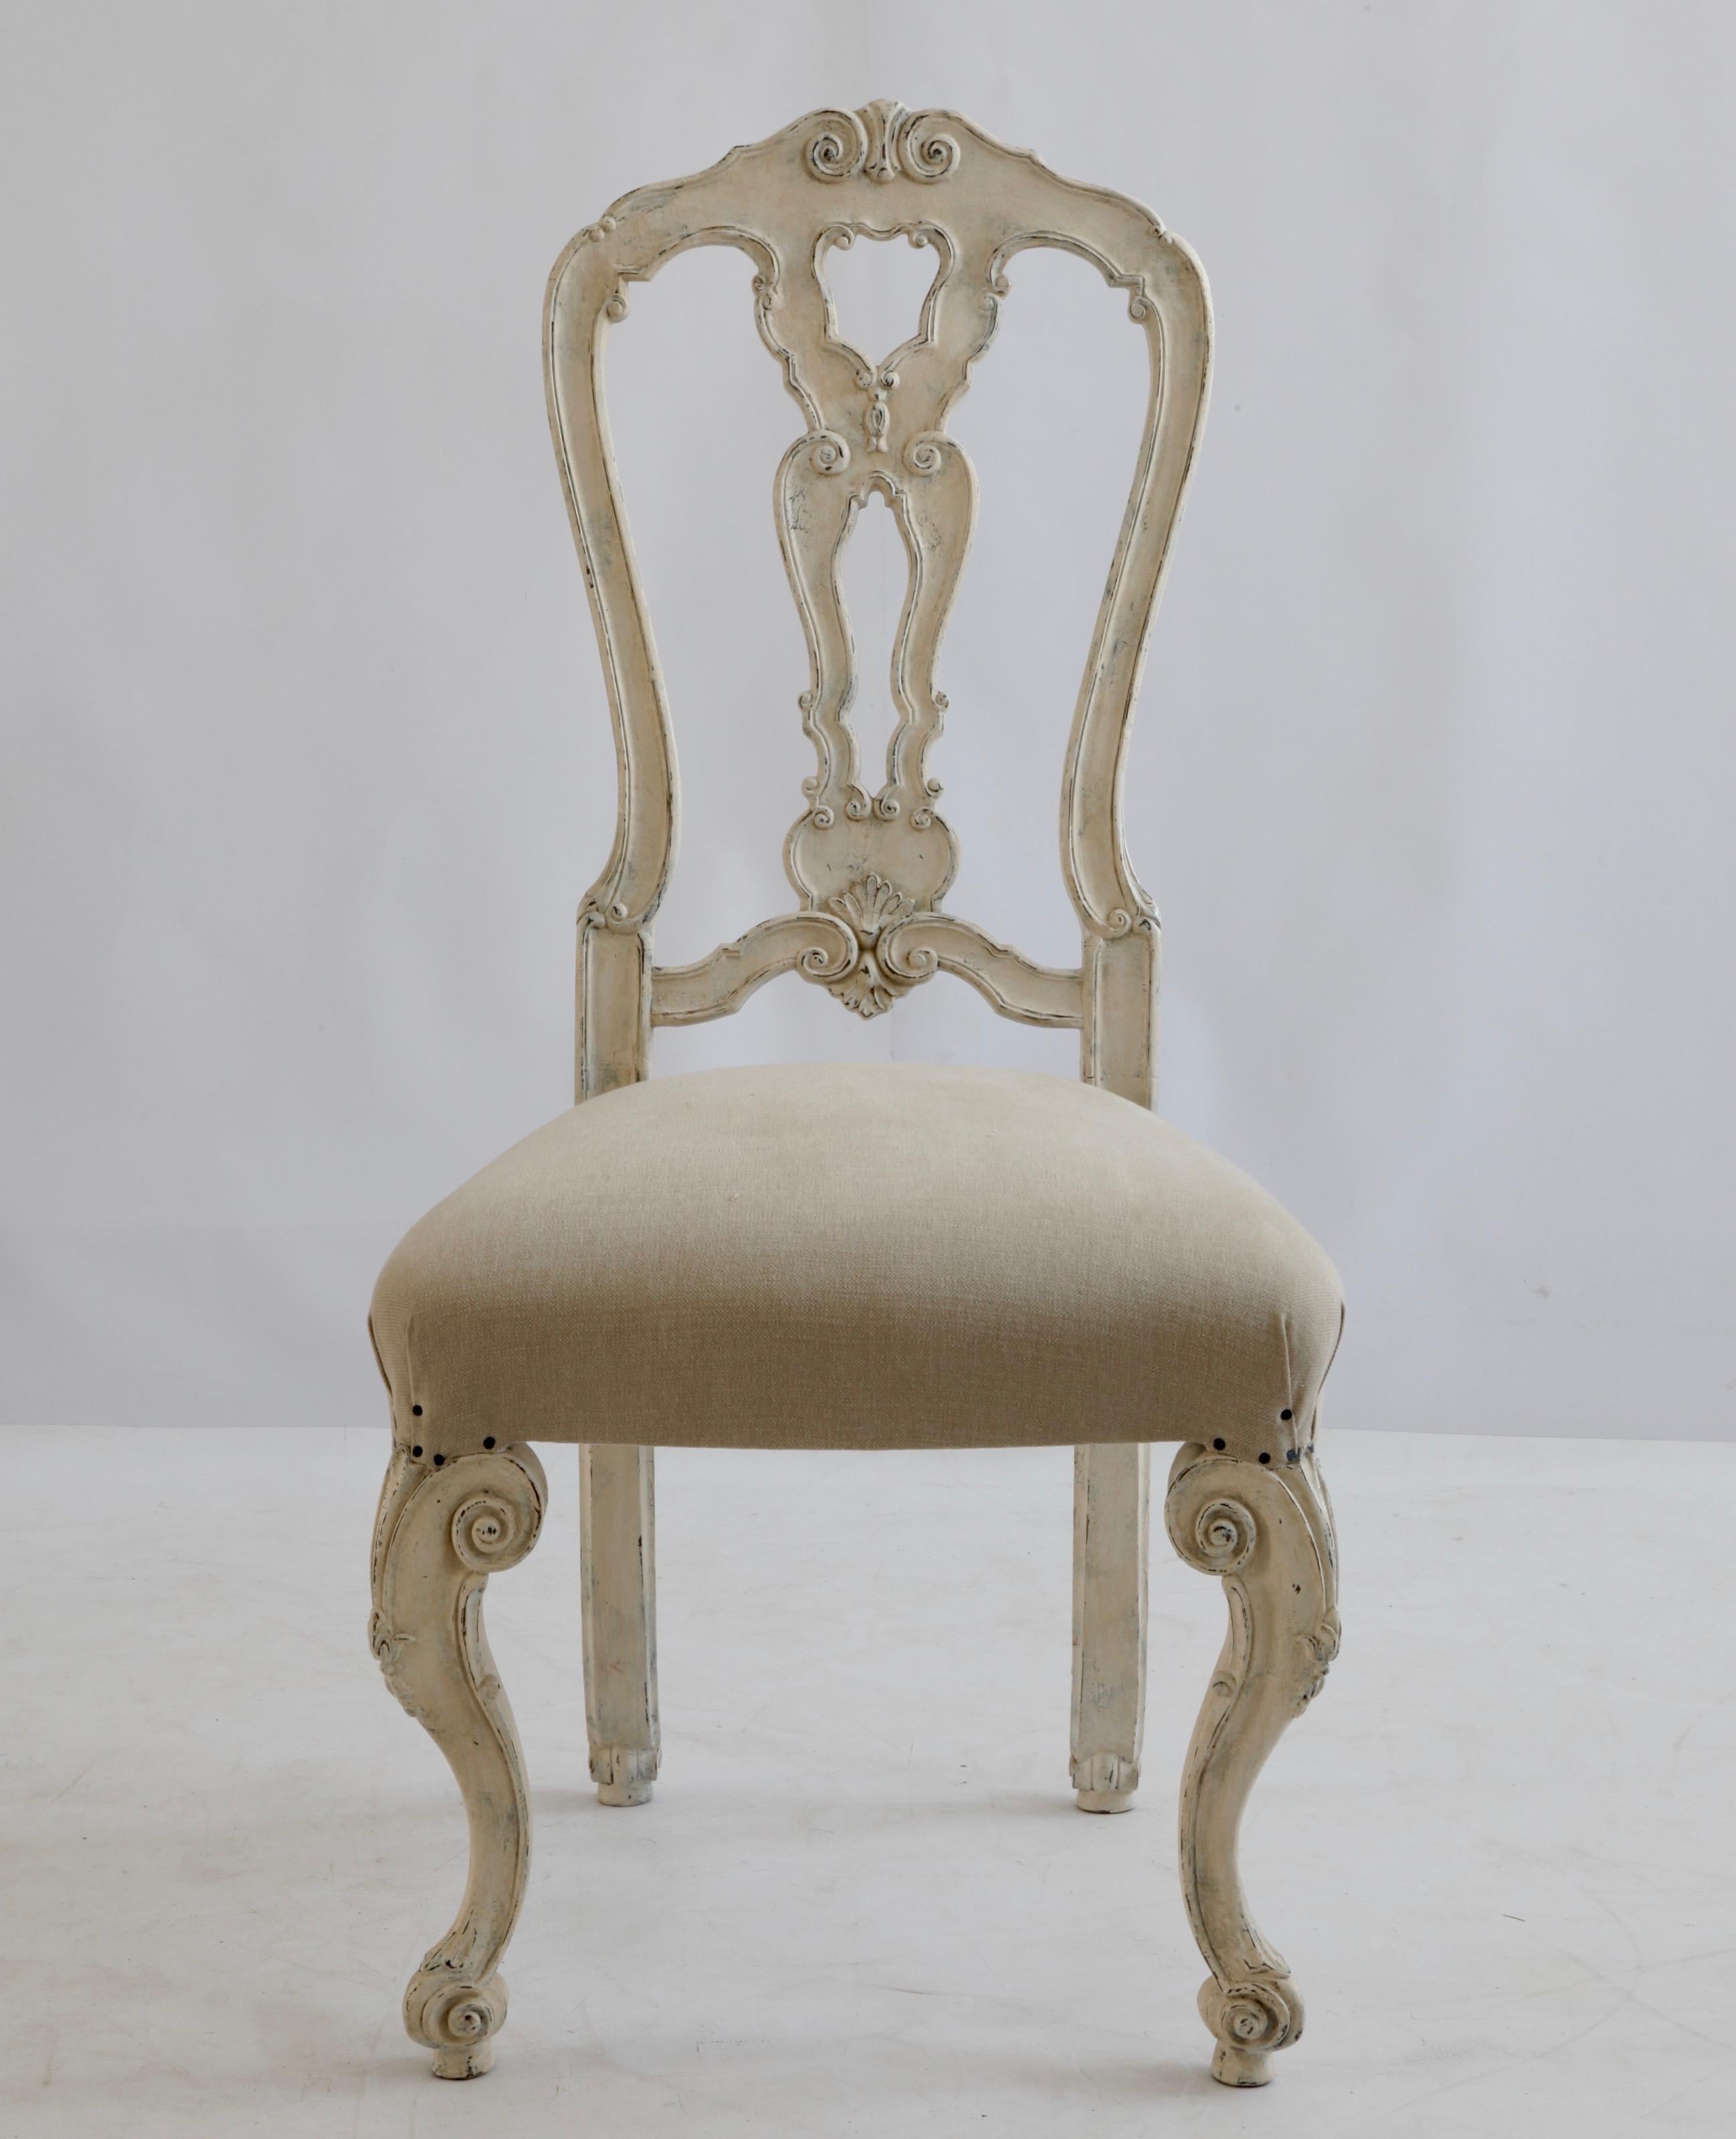 A set of x6 hand carved, Venetian style, dining chairs featuring tall backs and overall elegant proportions.
The chairs are finished in a hand painted Gesso white patina which is distressed for a textured antique feel. The chairs can be fully